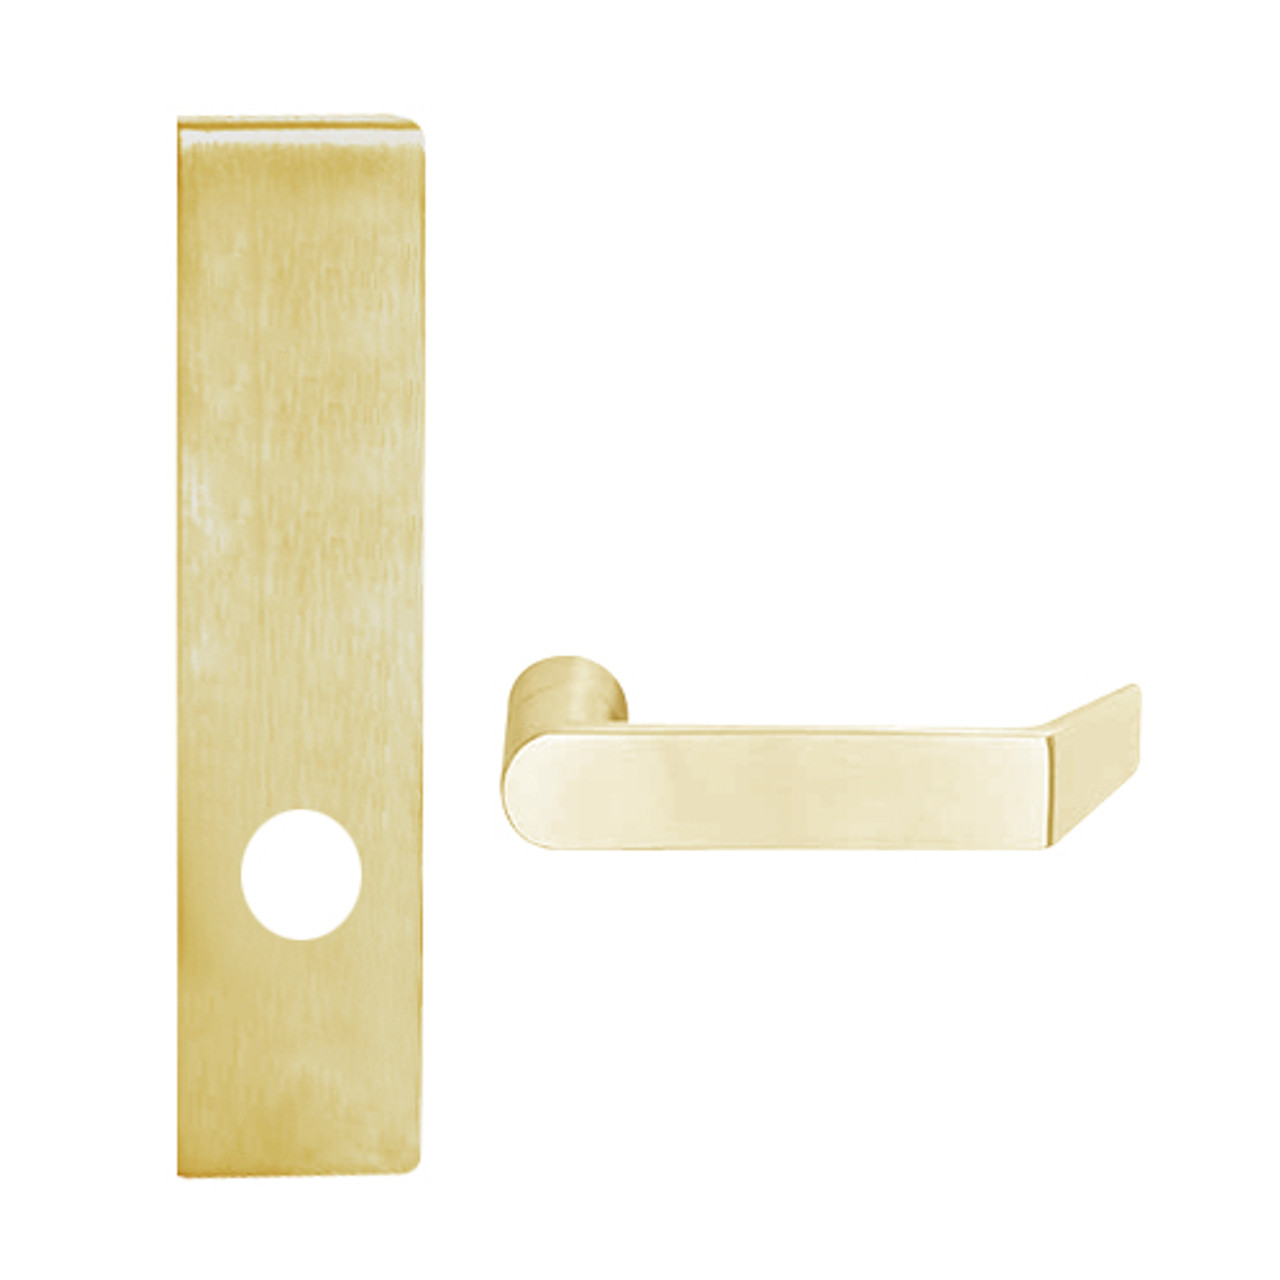 L9040-06N-605 Schlage L Series Privacy Commercial Mortise Lock with 06 Cast Lever Design in Bright Brass